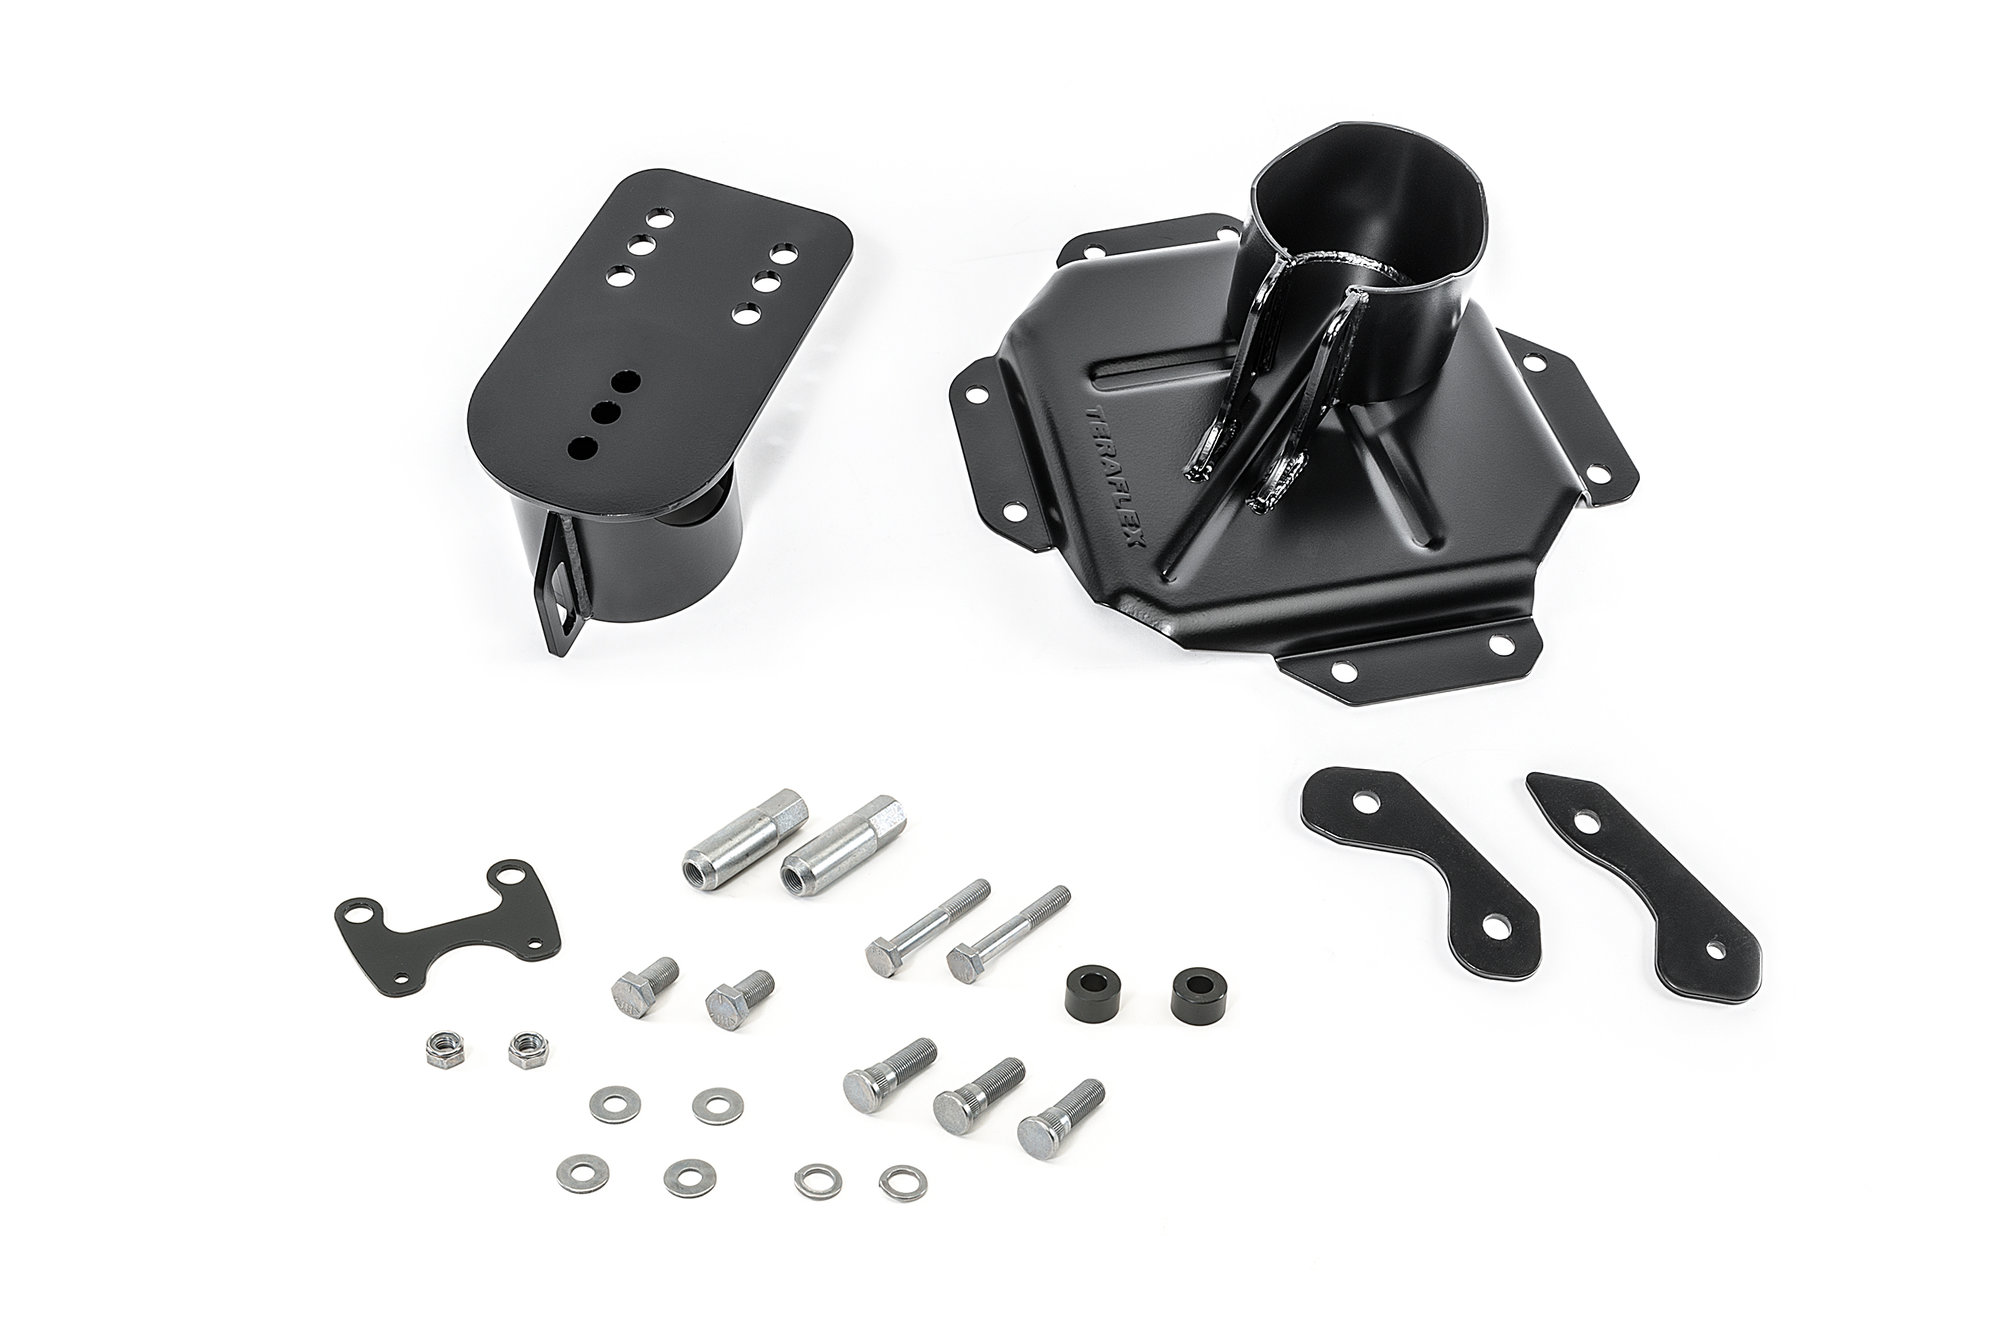 JK HD Hinged Carrier & Adjustable Spare Tire Mounting Kit The TeraFlex JK  heavy duty adjustable tire carrier kit is designed to